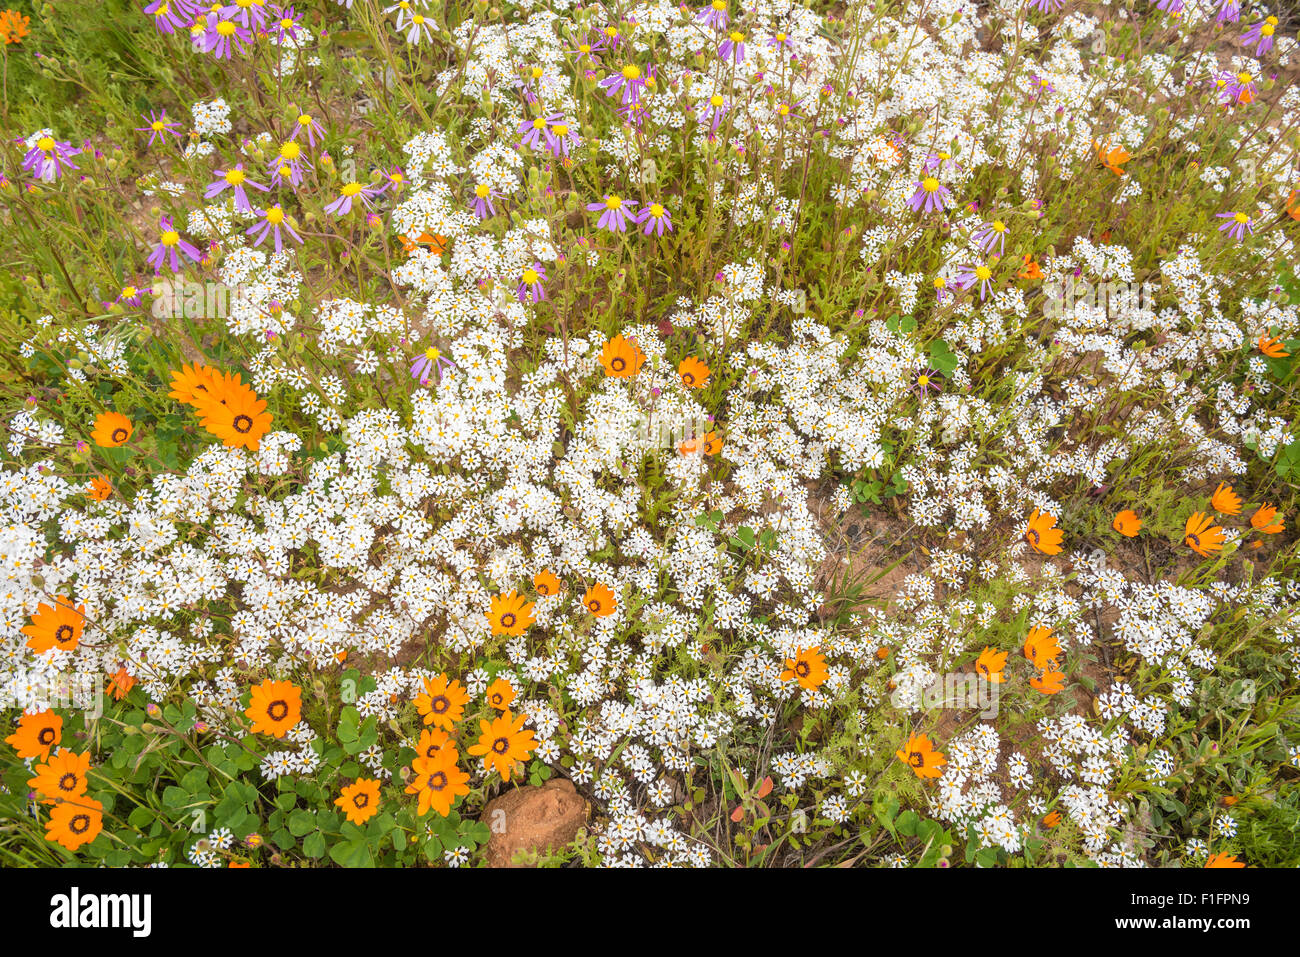 A display of wild flowers at the turn-off from the N7 to Groenrivier in the Namaqualand region of South Africa. Orange botterblo Stock Photo